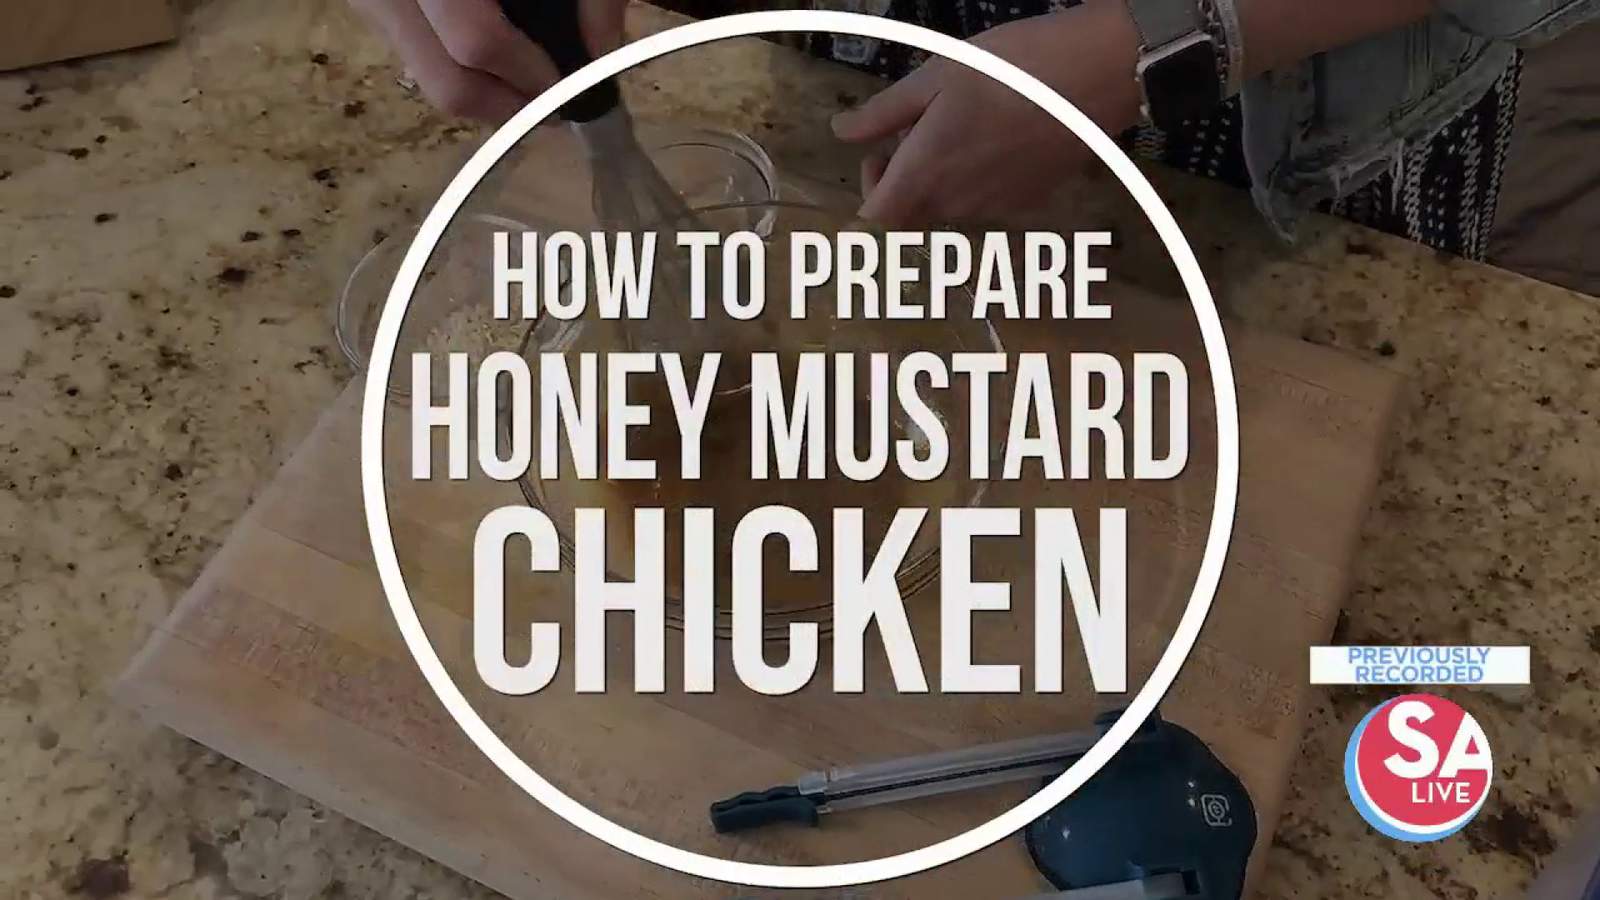 The 5 ingredients you need to prepare Honey Mustard Chicken